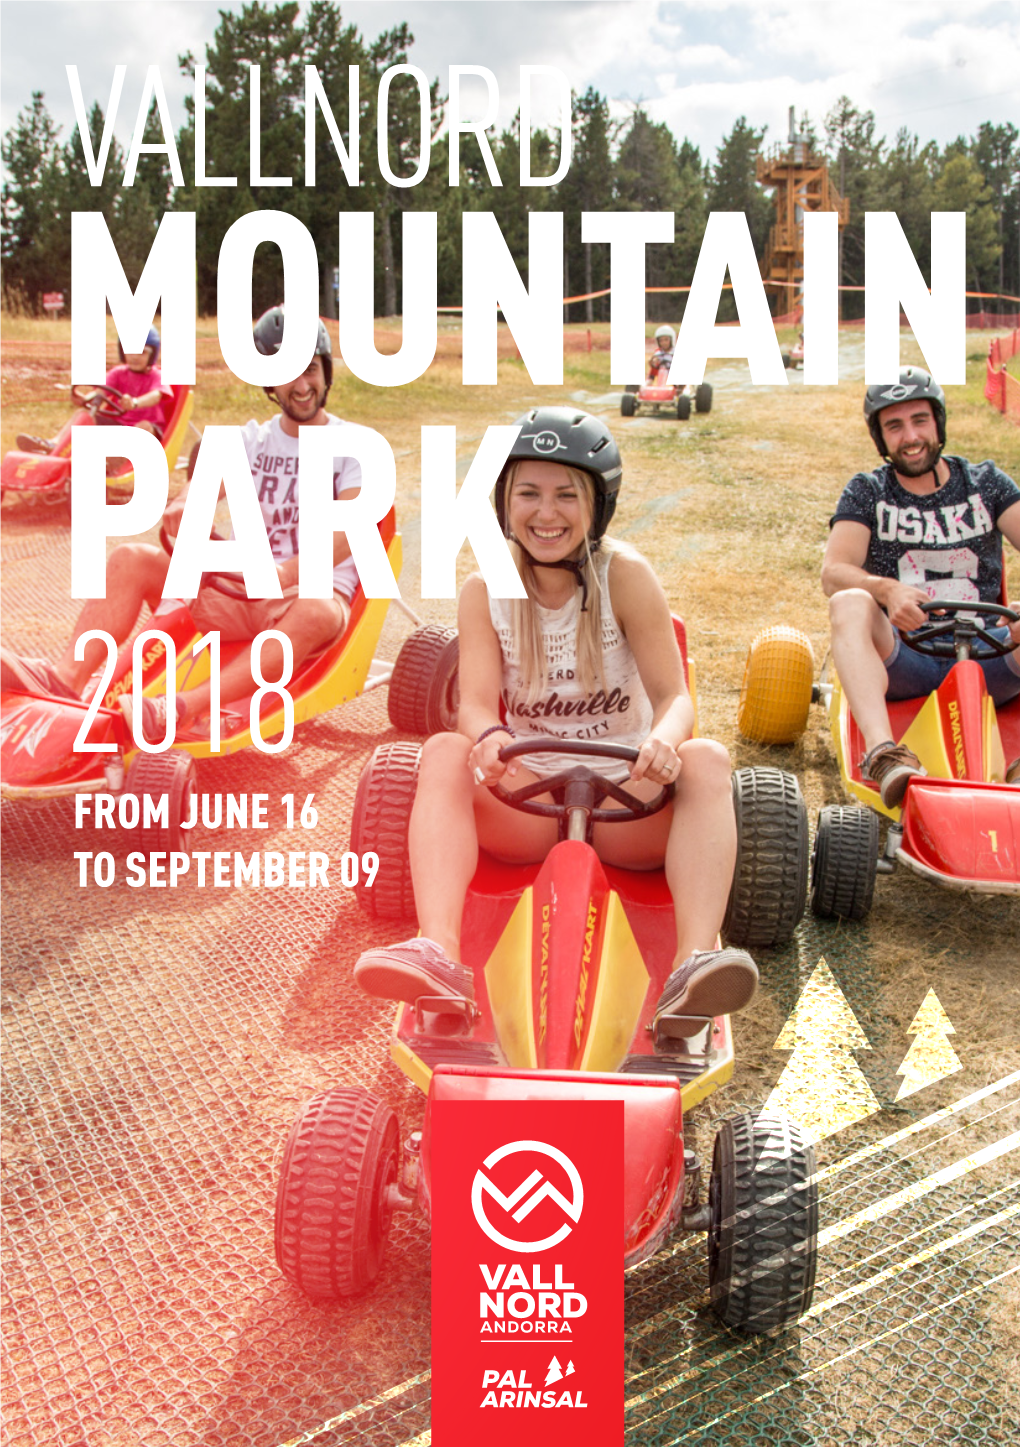 From June 16 to September 09 Vallnord Mountain Park